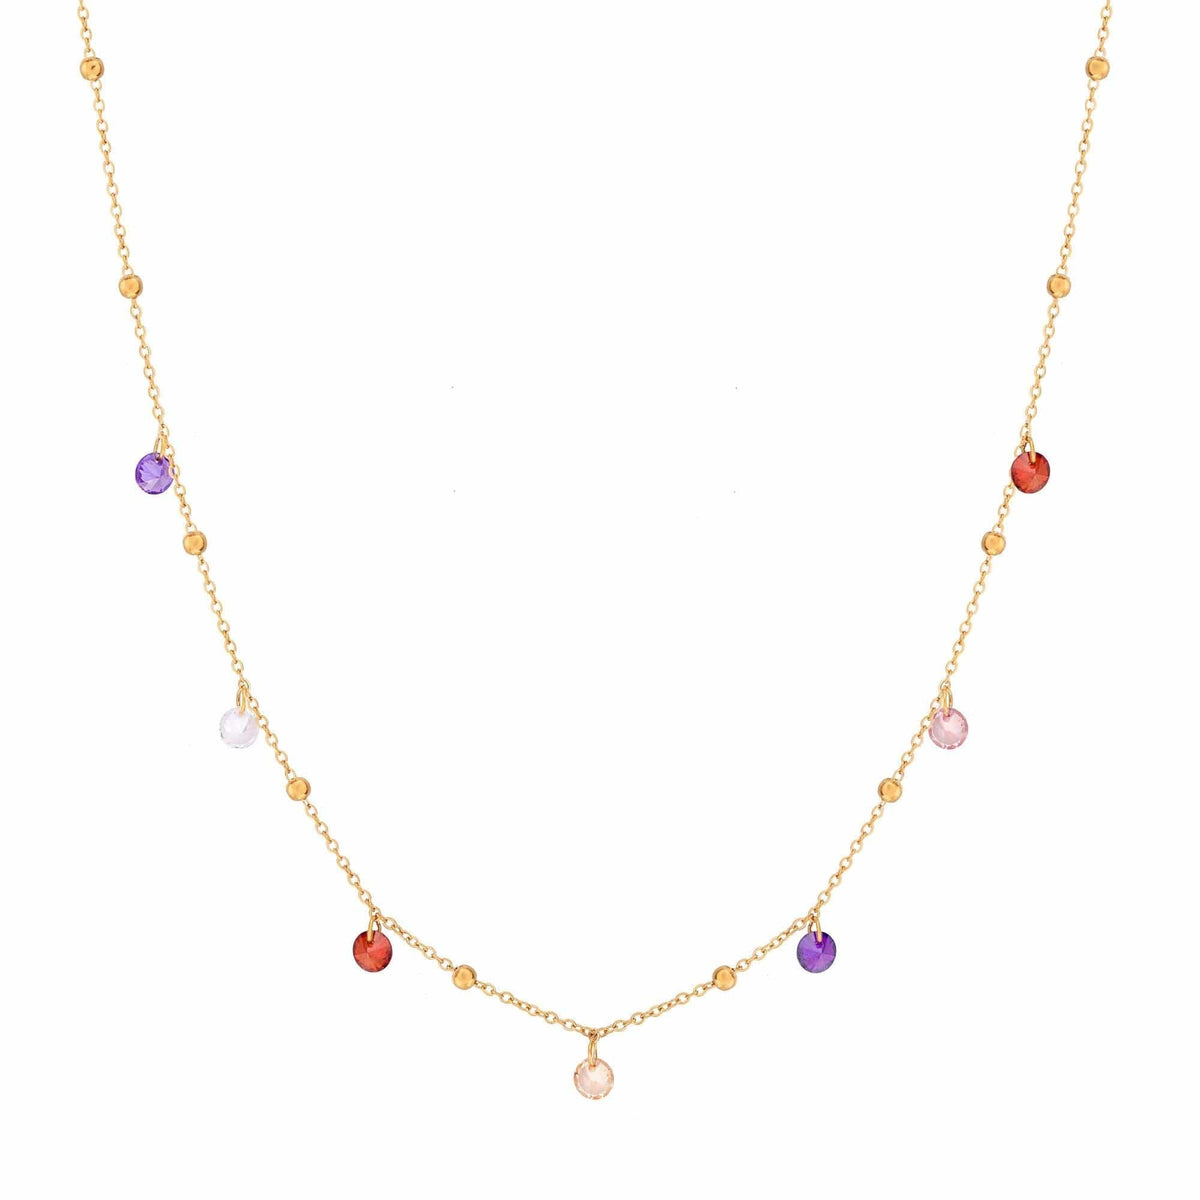 BohoMoon Stainless Steel Marciella Necklace Gold